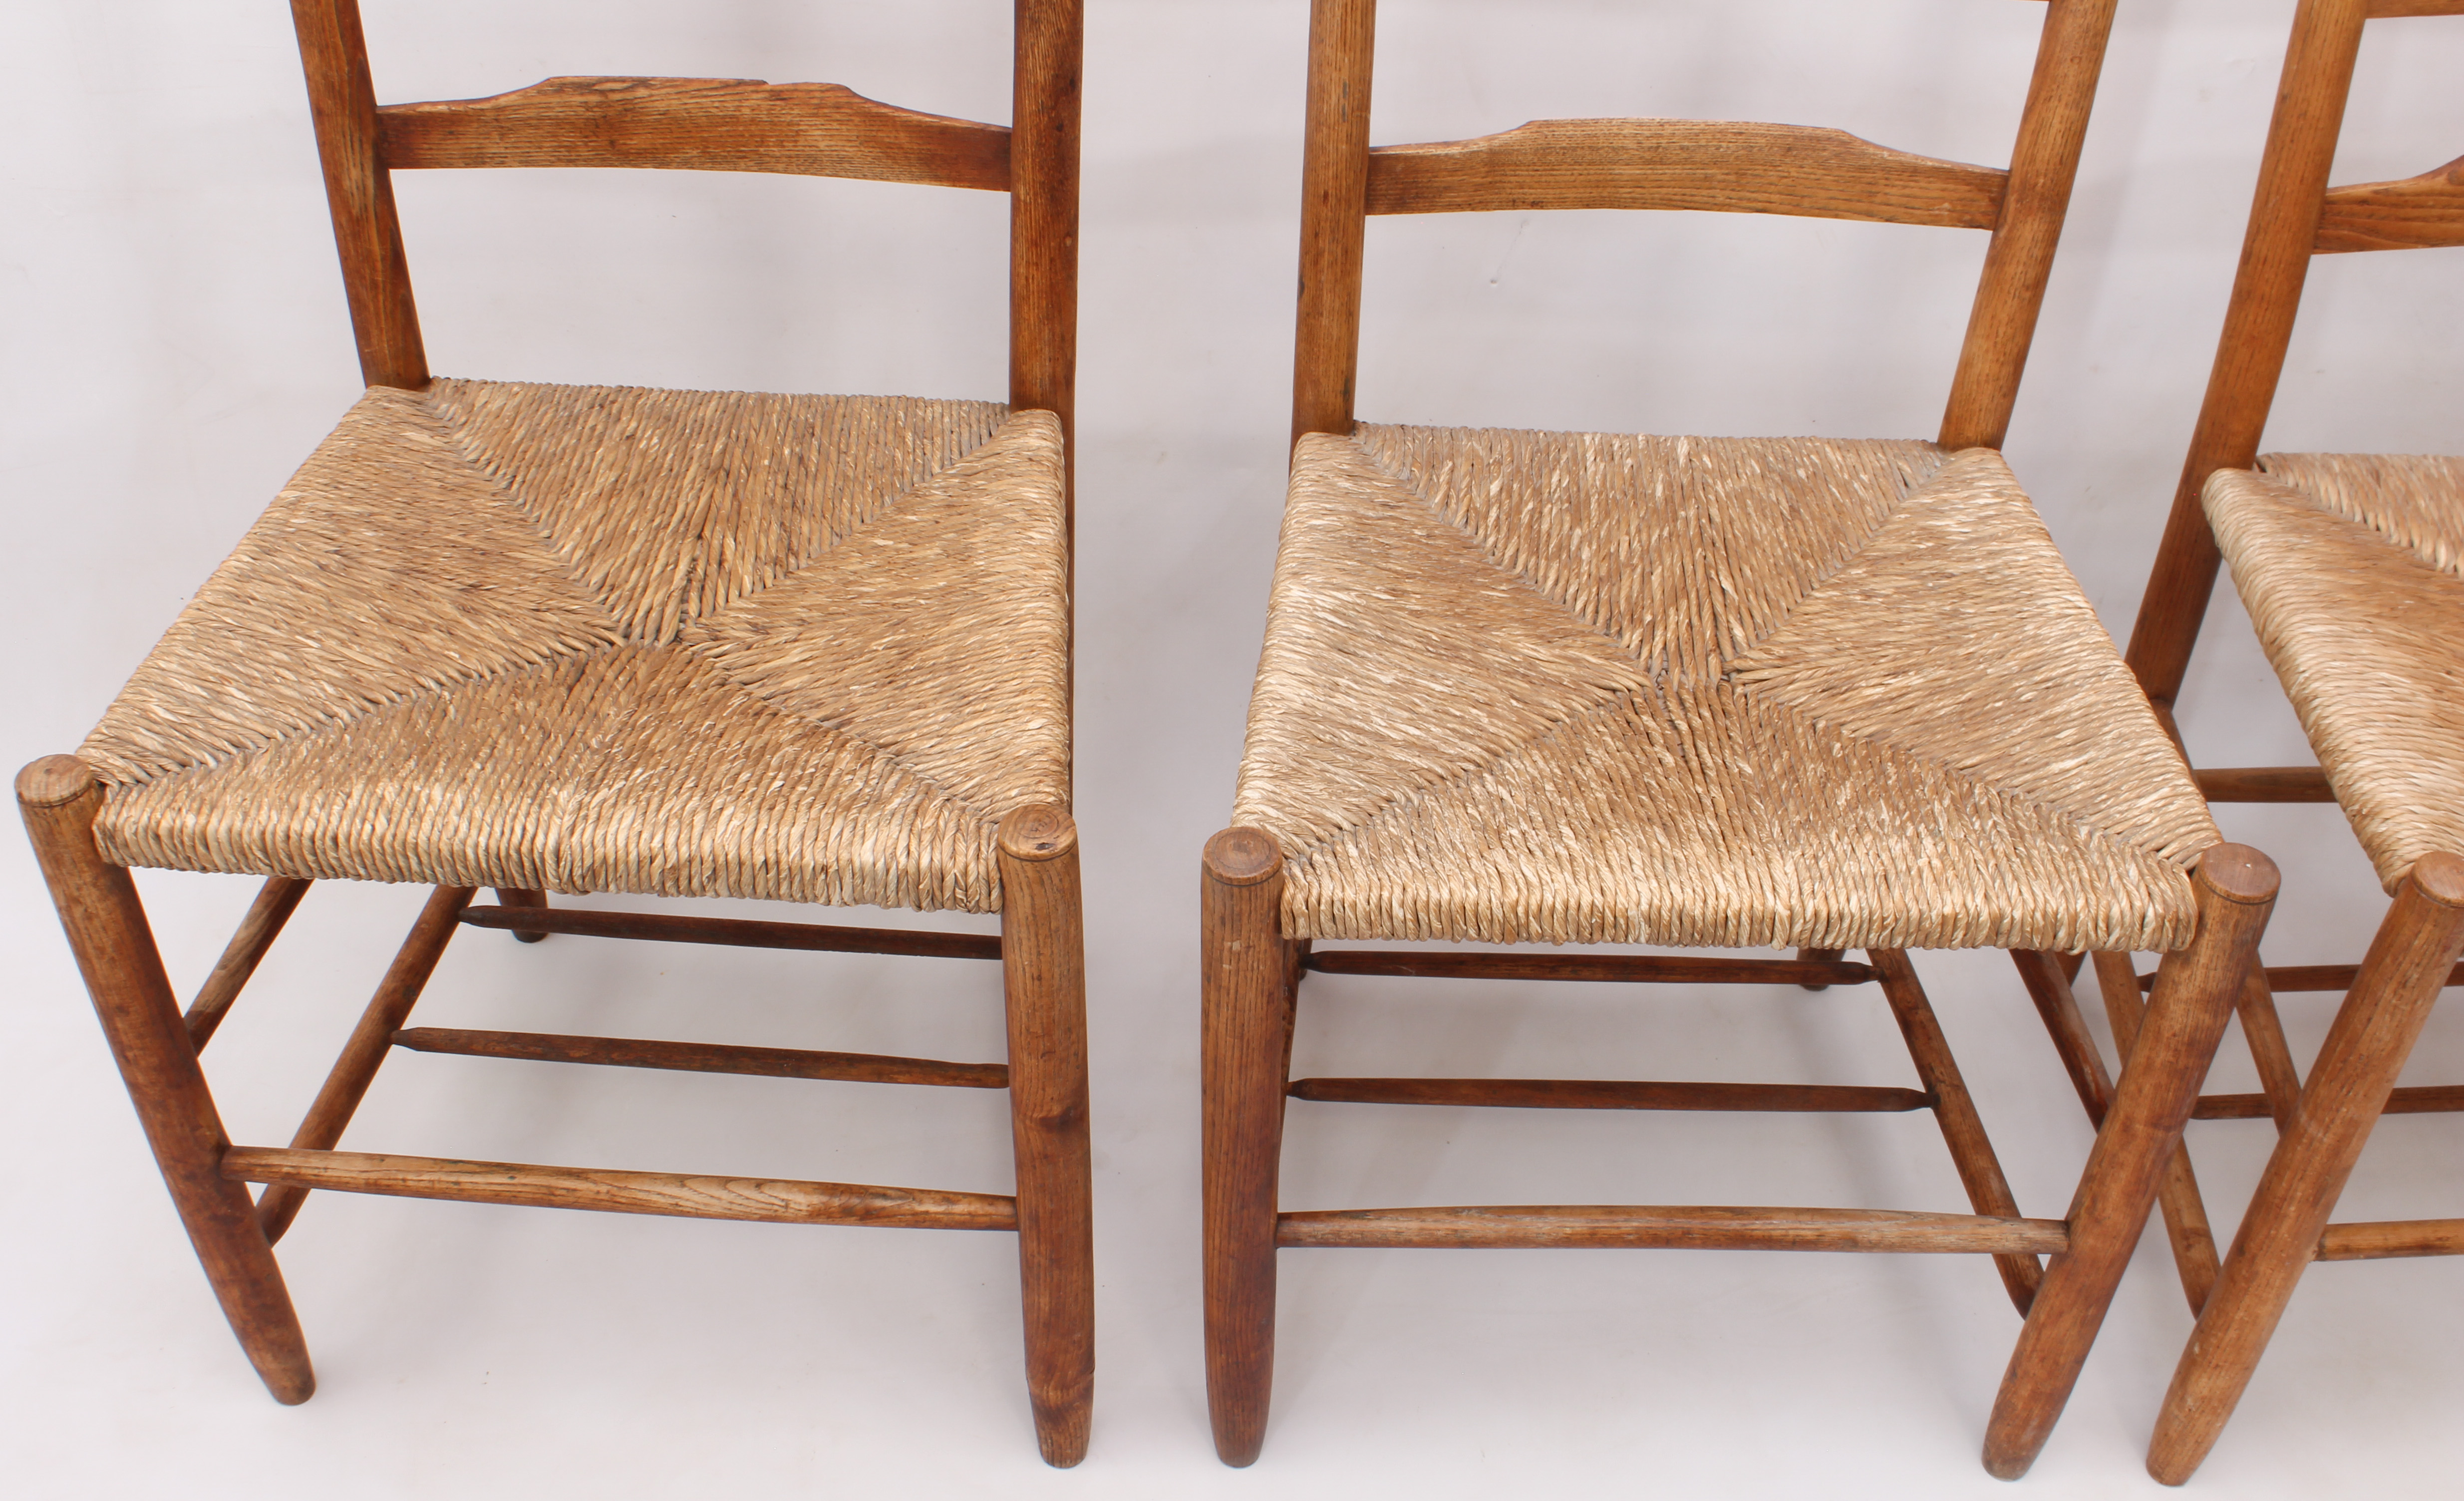 Three Cotswold School 19th century ash and elm ladderback chairs in the style of Philip Clissett - - Image 2 of 3